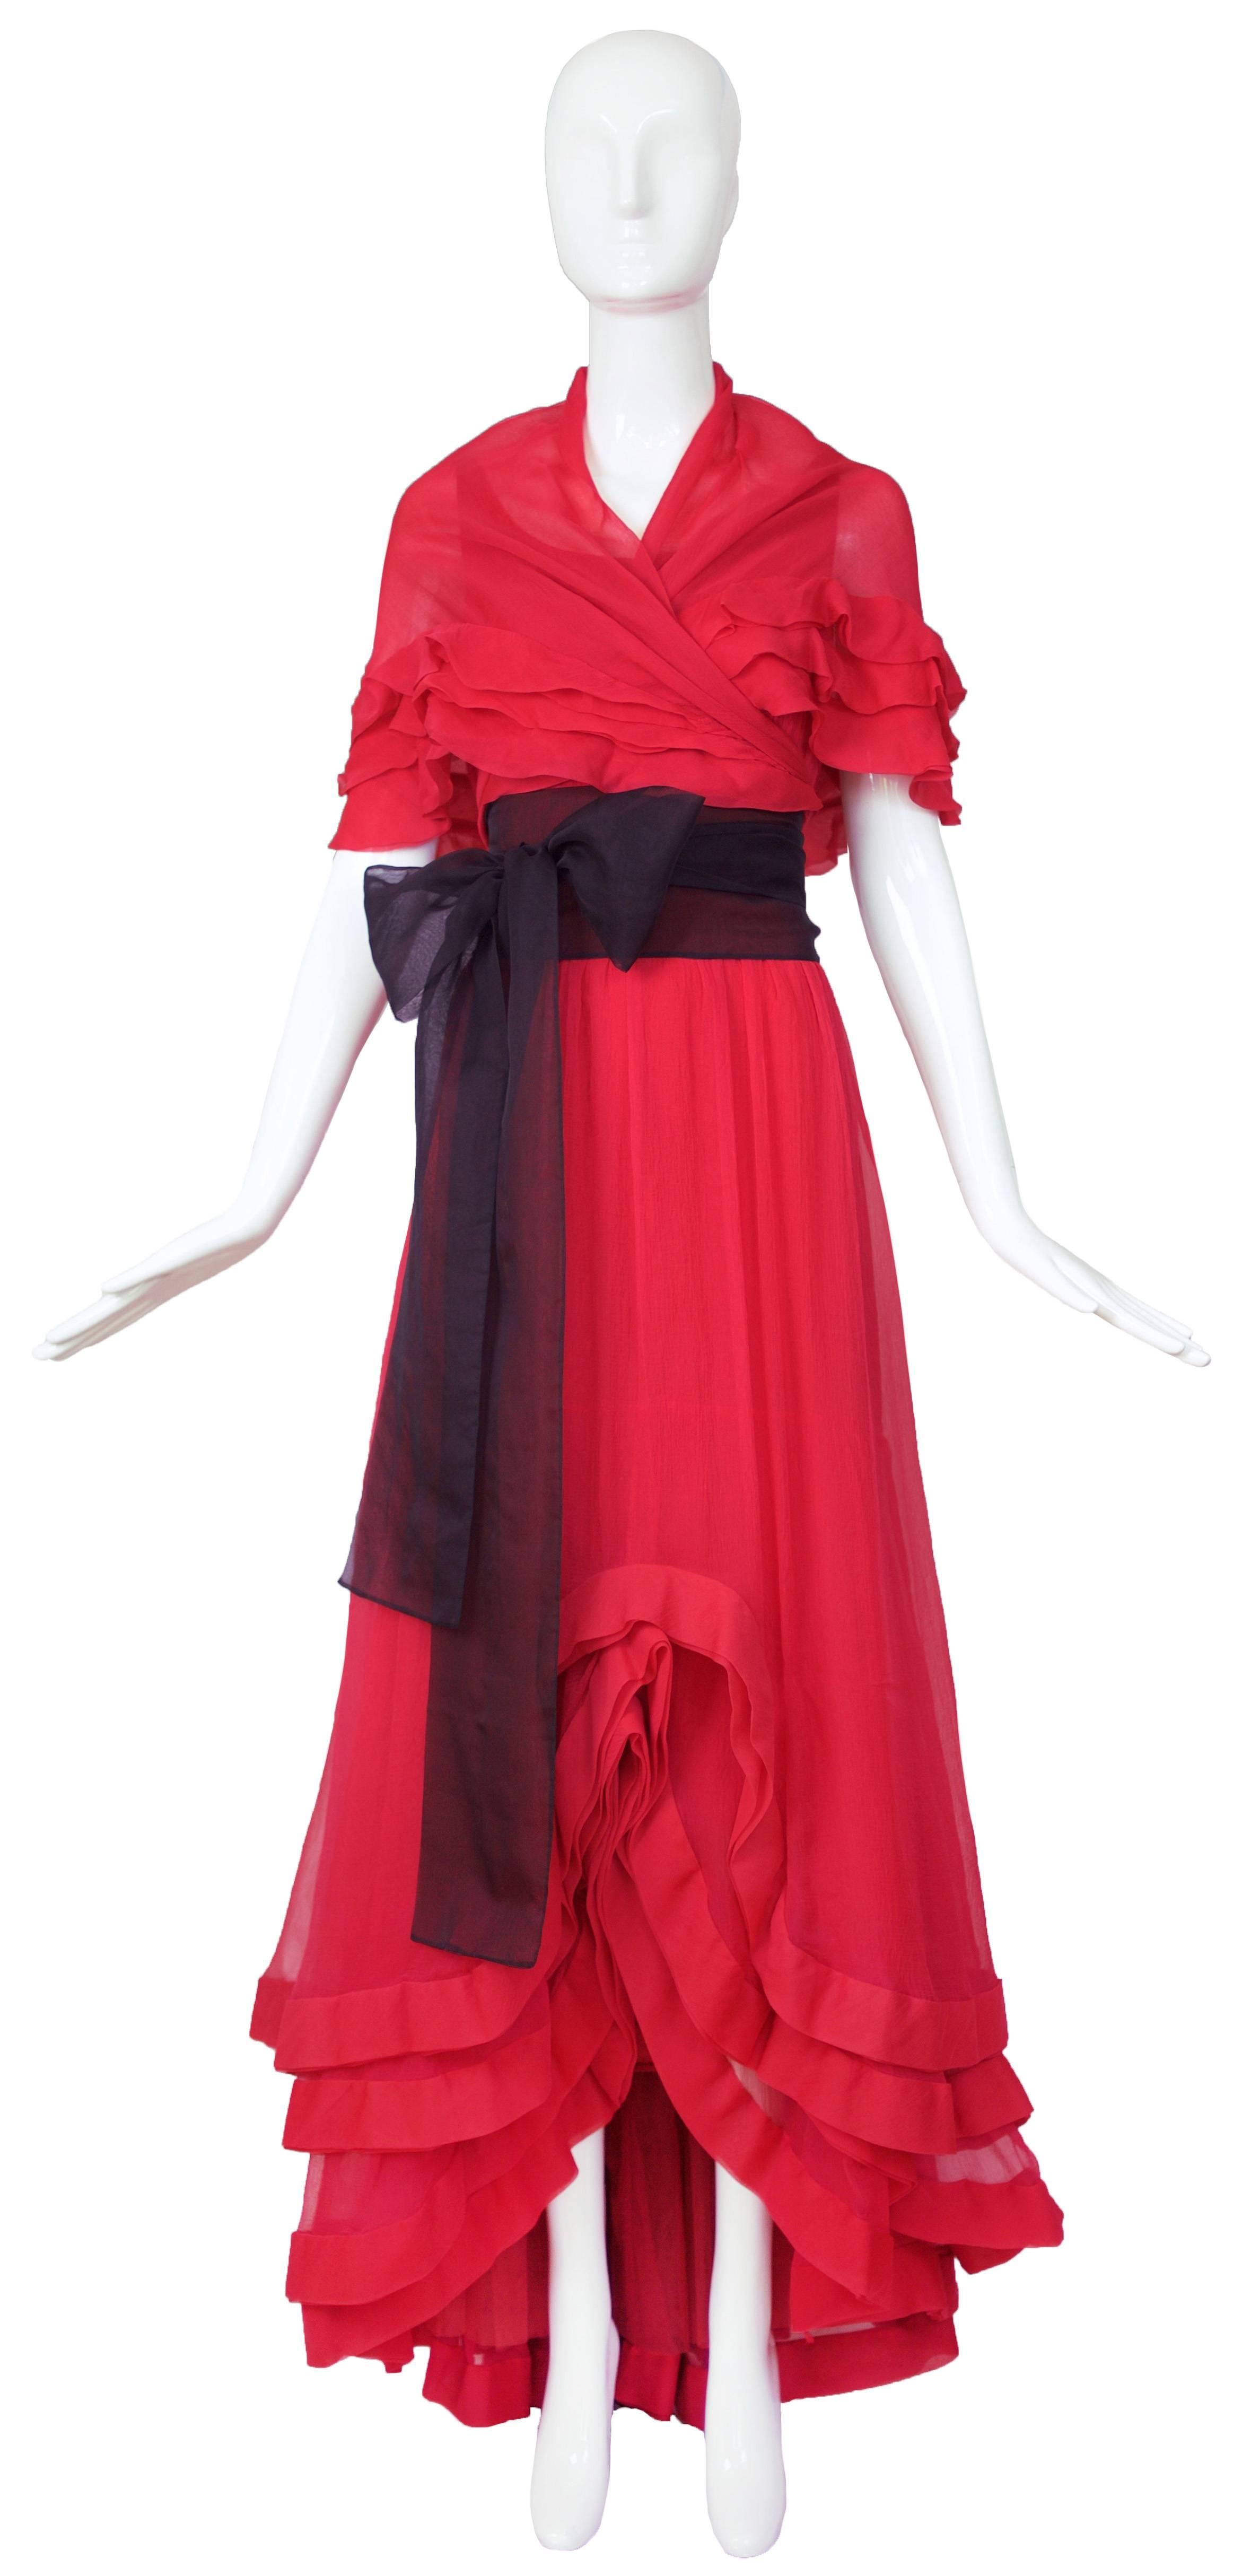 Circa 1968/1970's Valentino couture multi-layered chiffon and crepe gown in a deep red imbued with fuchsia undertones with a waterfall hem, crinoline at the interior of the back bottom hem and side zipper closure. Comes with a black chiffon sash and